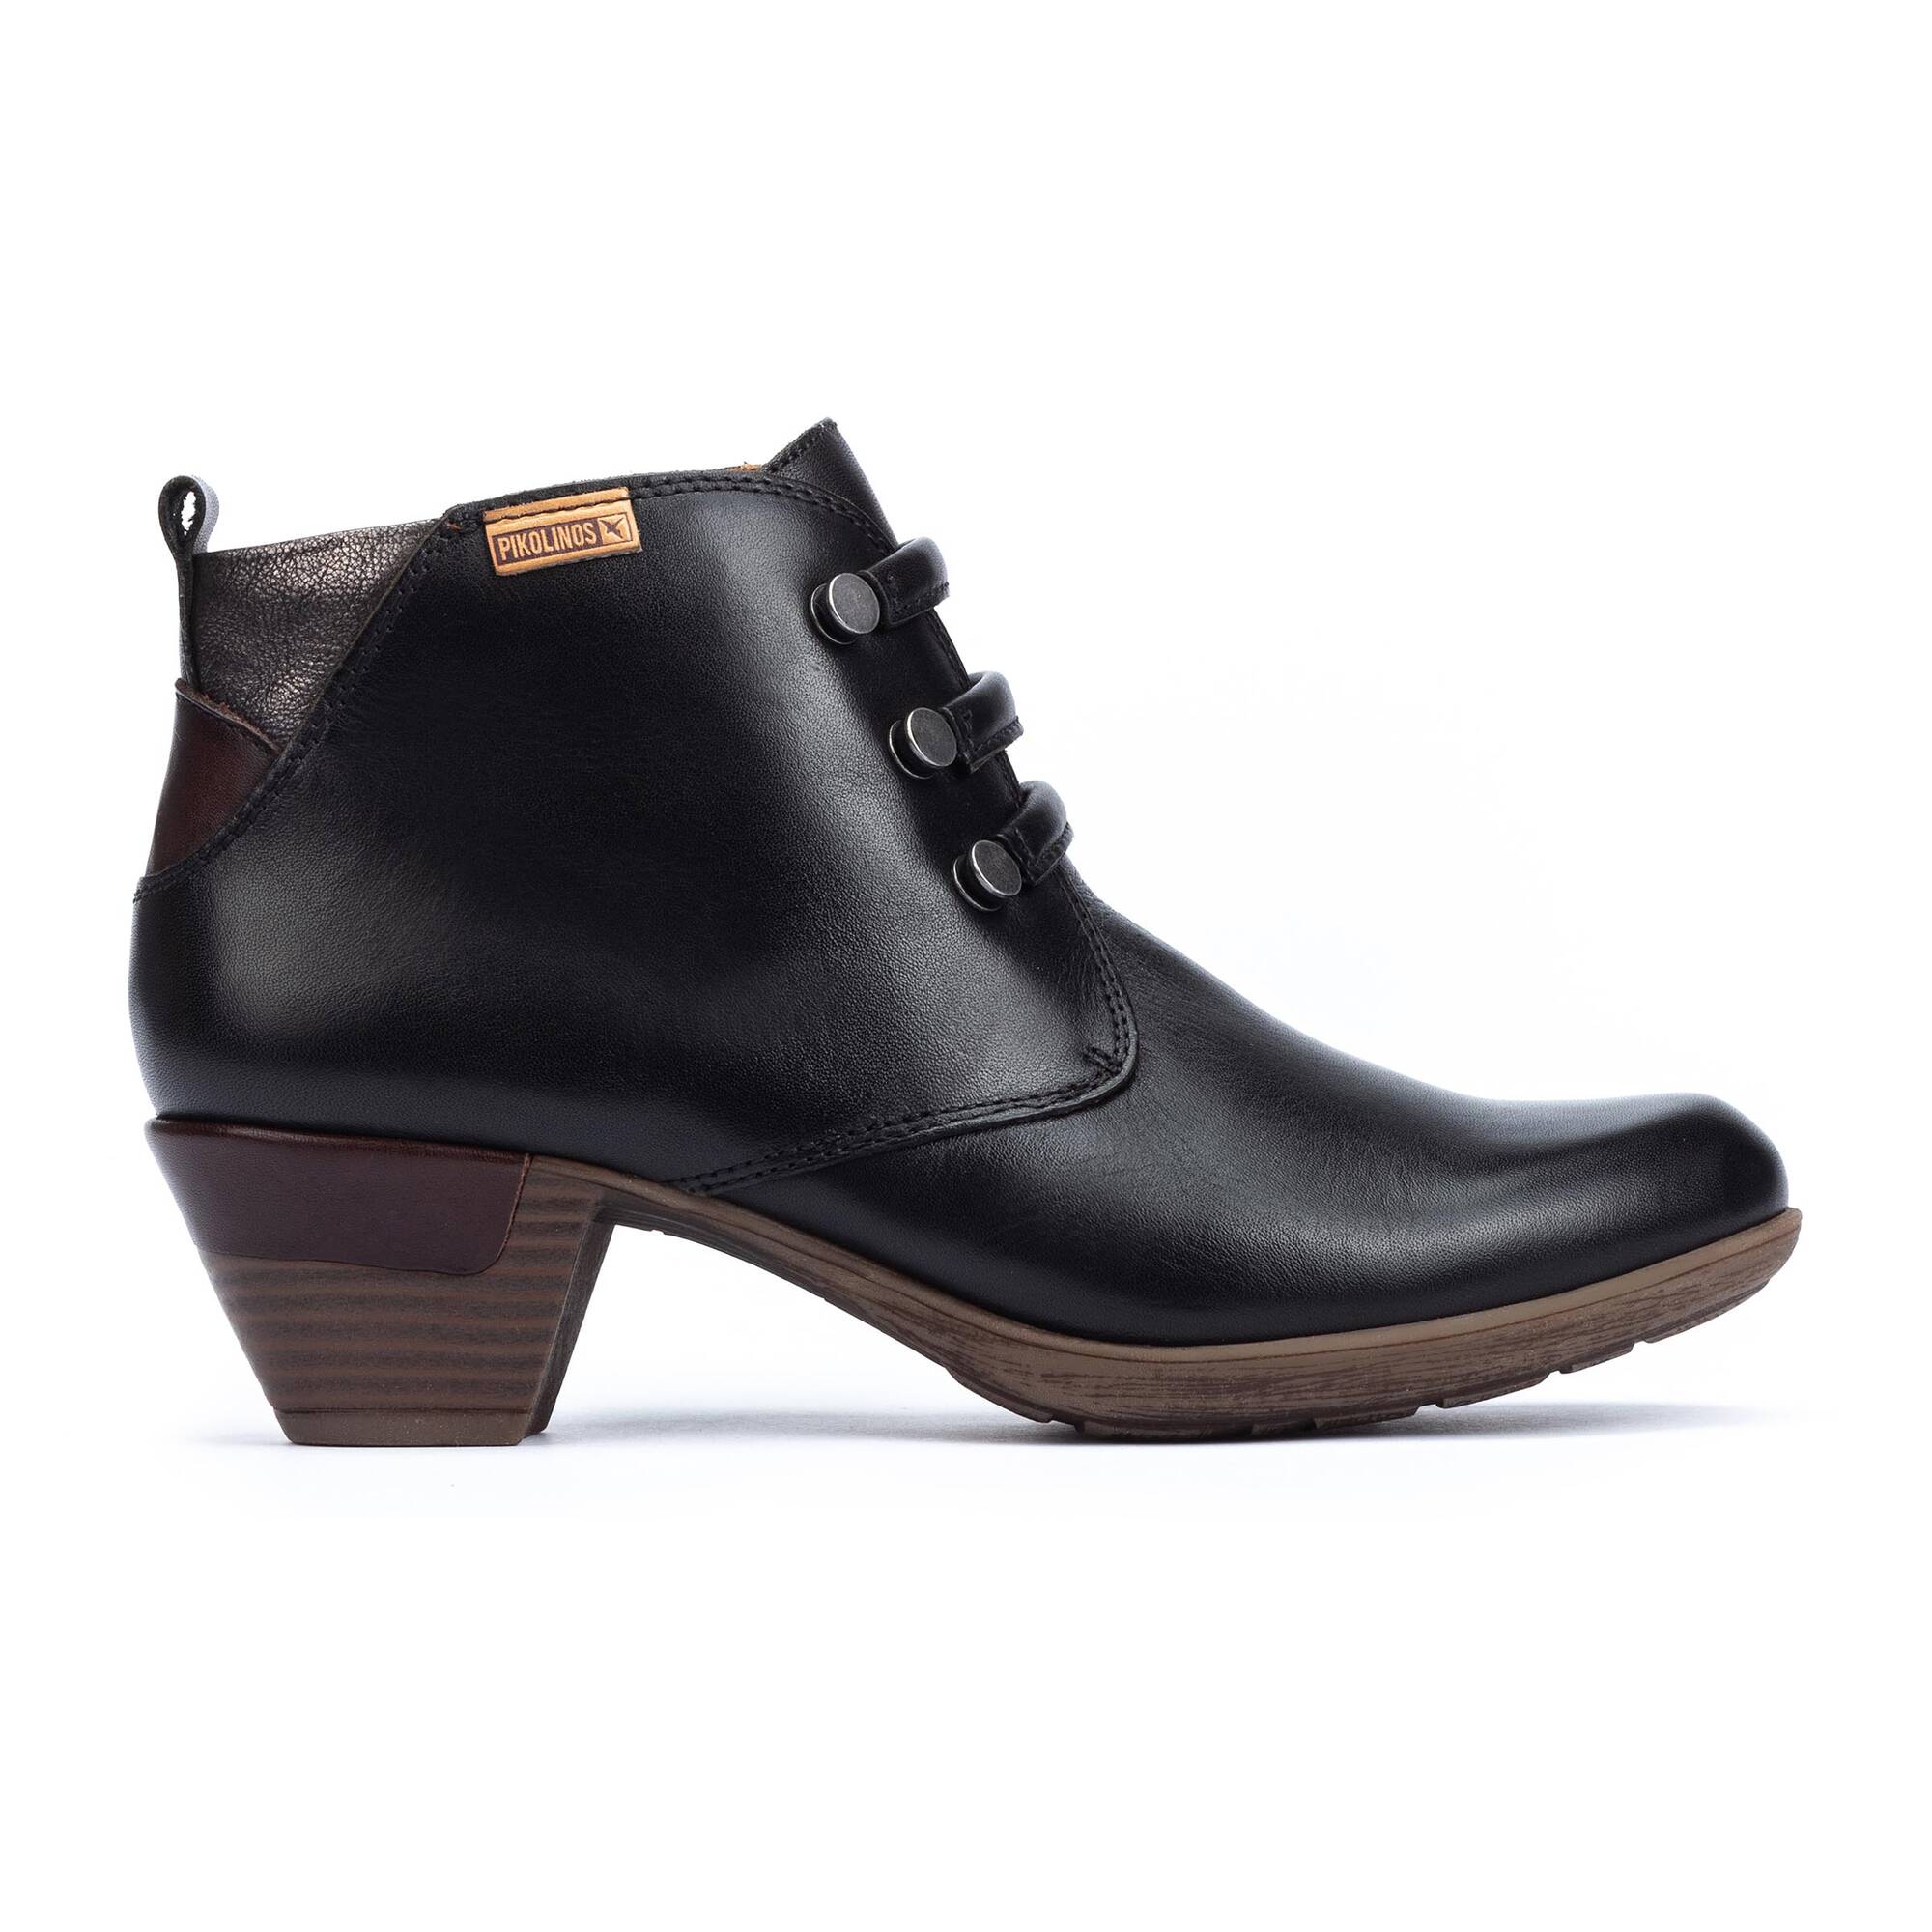 Ankle boots | ROTTERDAM 902-8746, BLACK, large image number 10 | null